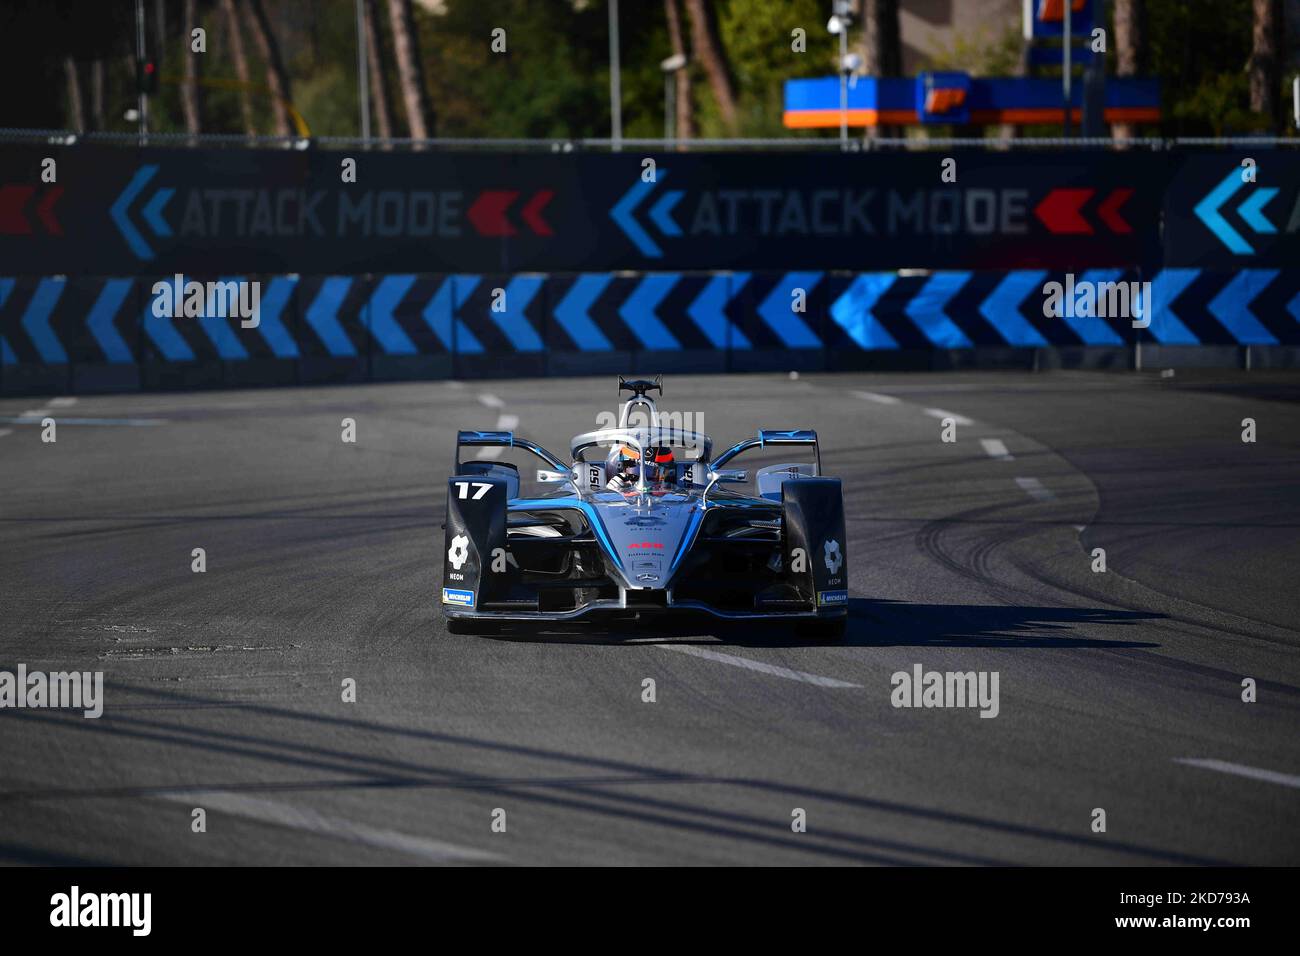 Nyck De Vries of Mercedes-EQ Formula E Team drive his single seater during qualifying of Day 2 of Rome E-Prix, 5th round of Formula E World Championship in city circuit of Rome, EUR neighborhood Rome, 10 April 2022 (Photo by Andrea Diodato/NurPhoto) Stock Photo